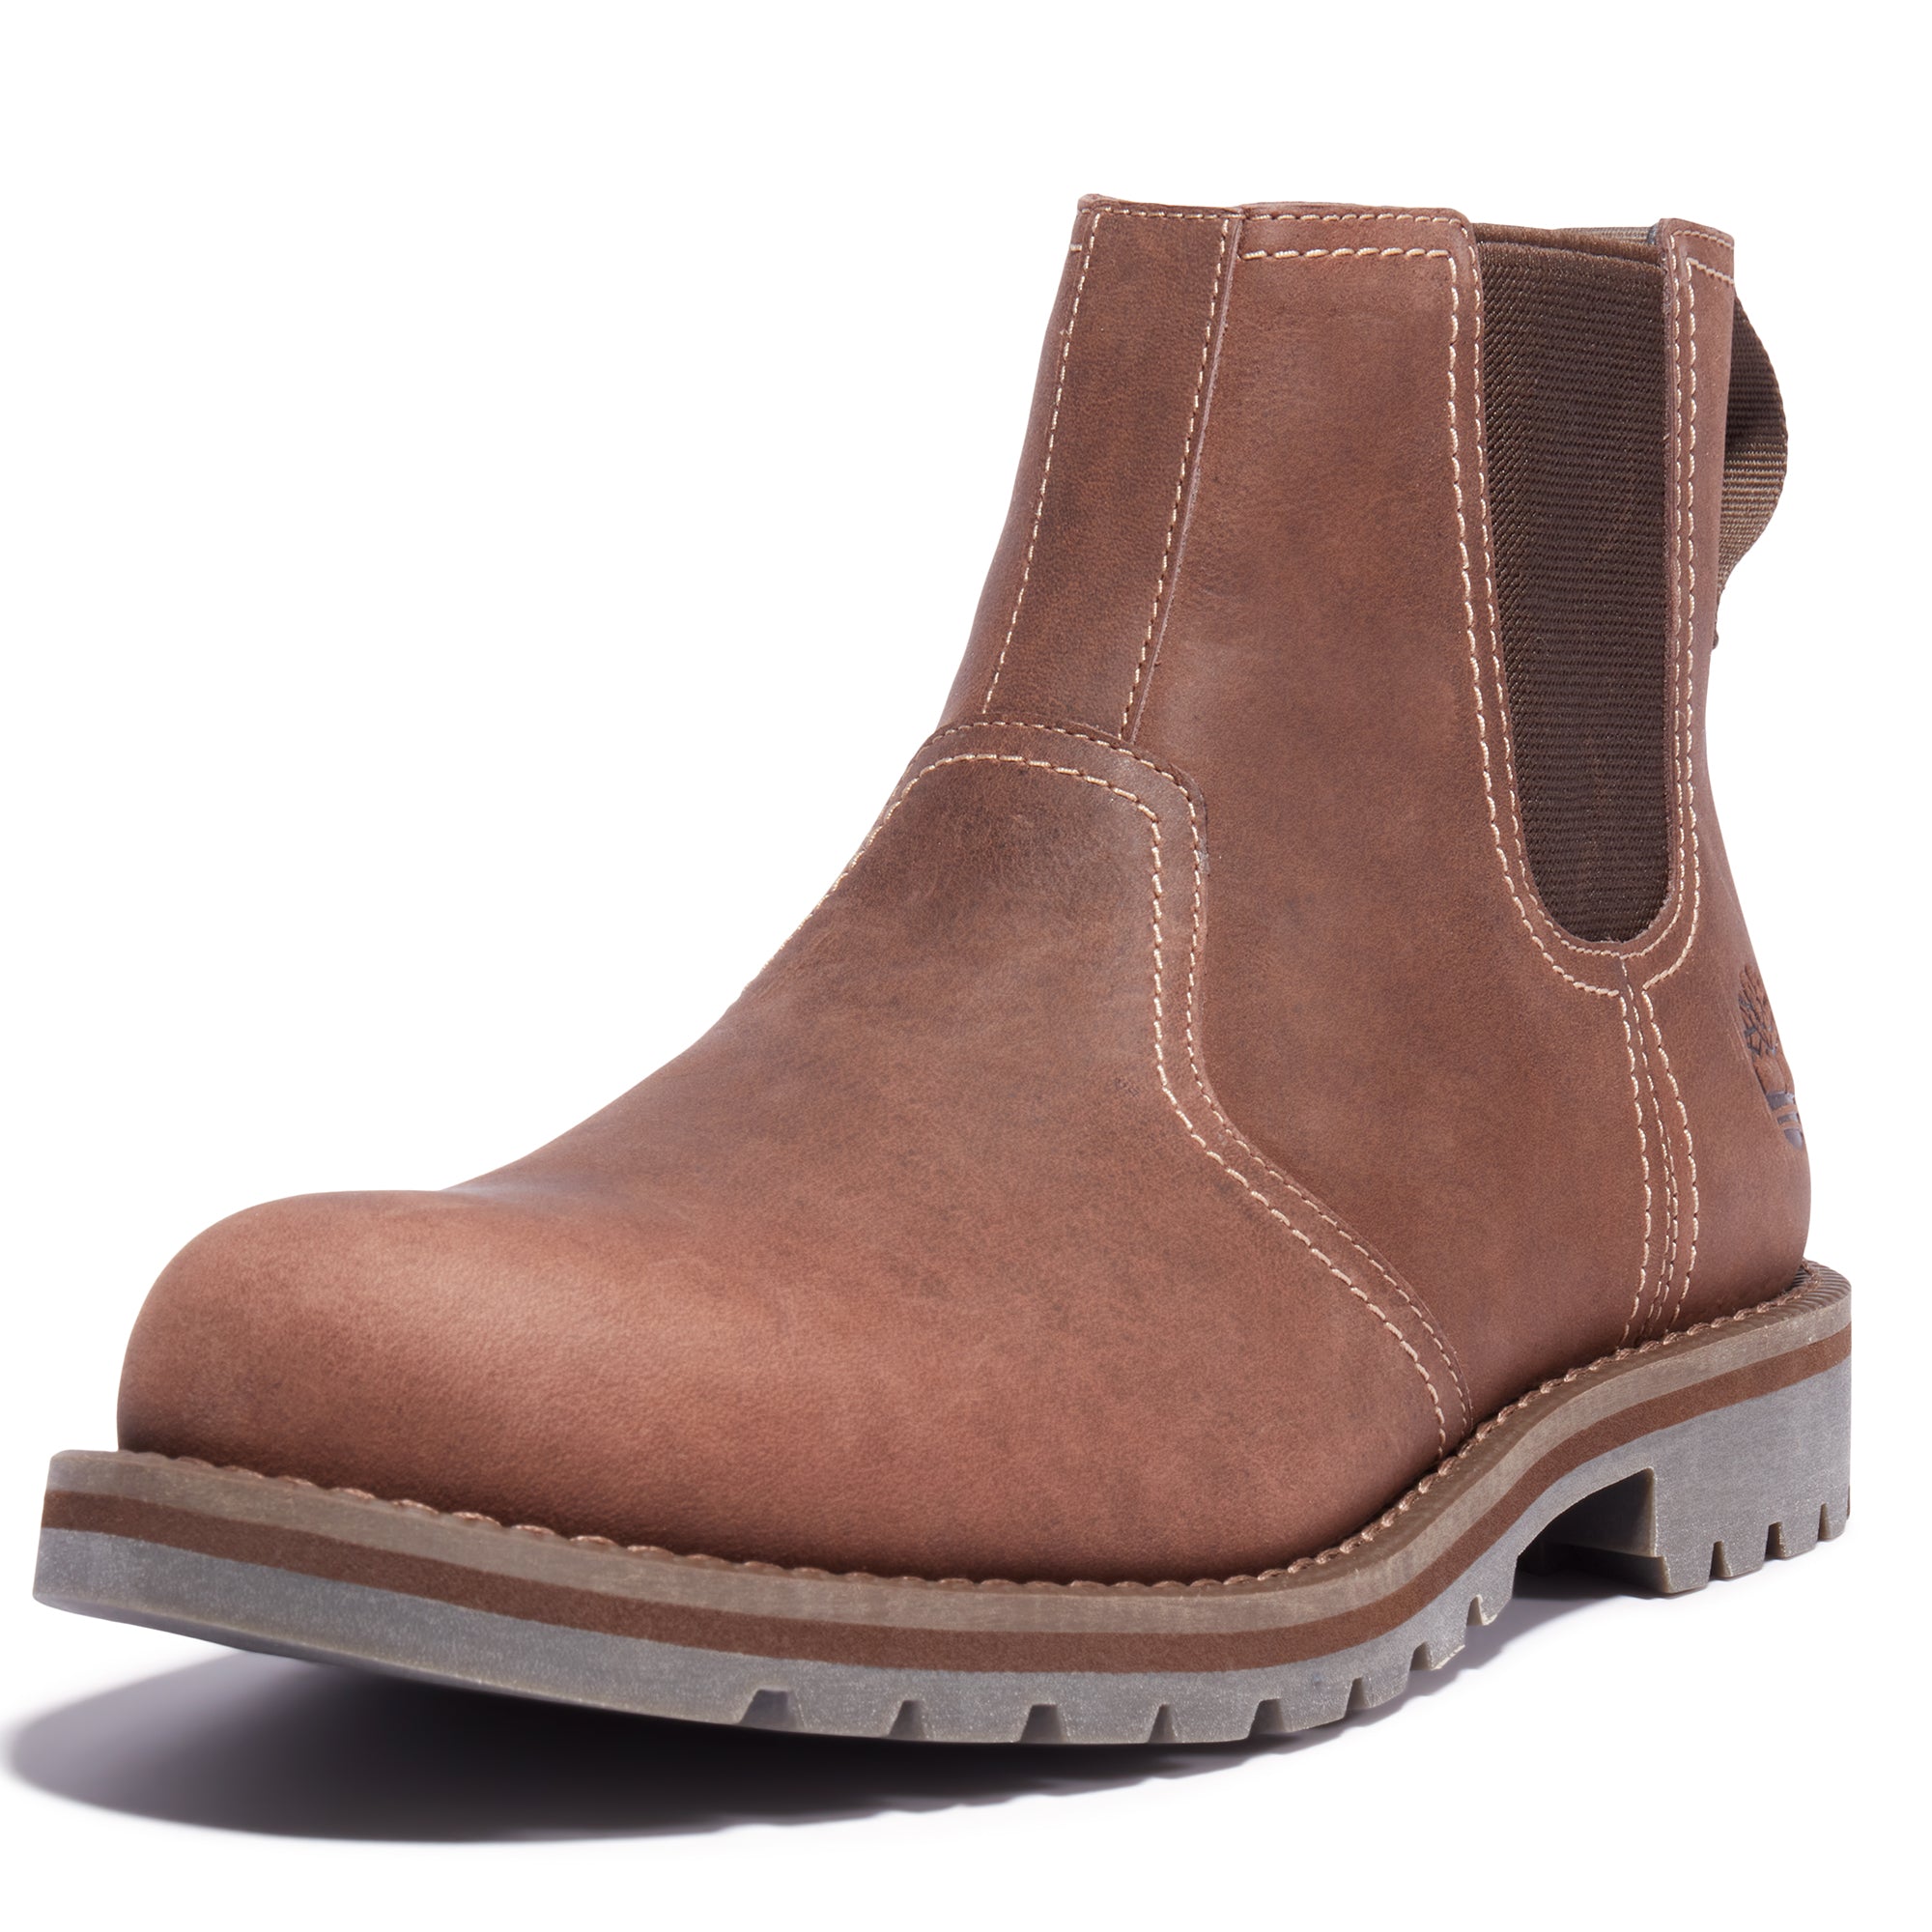 Timberland Larchmont II Chelsea Boot Mid Brown Full